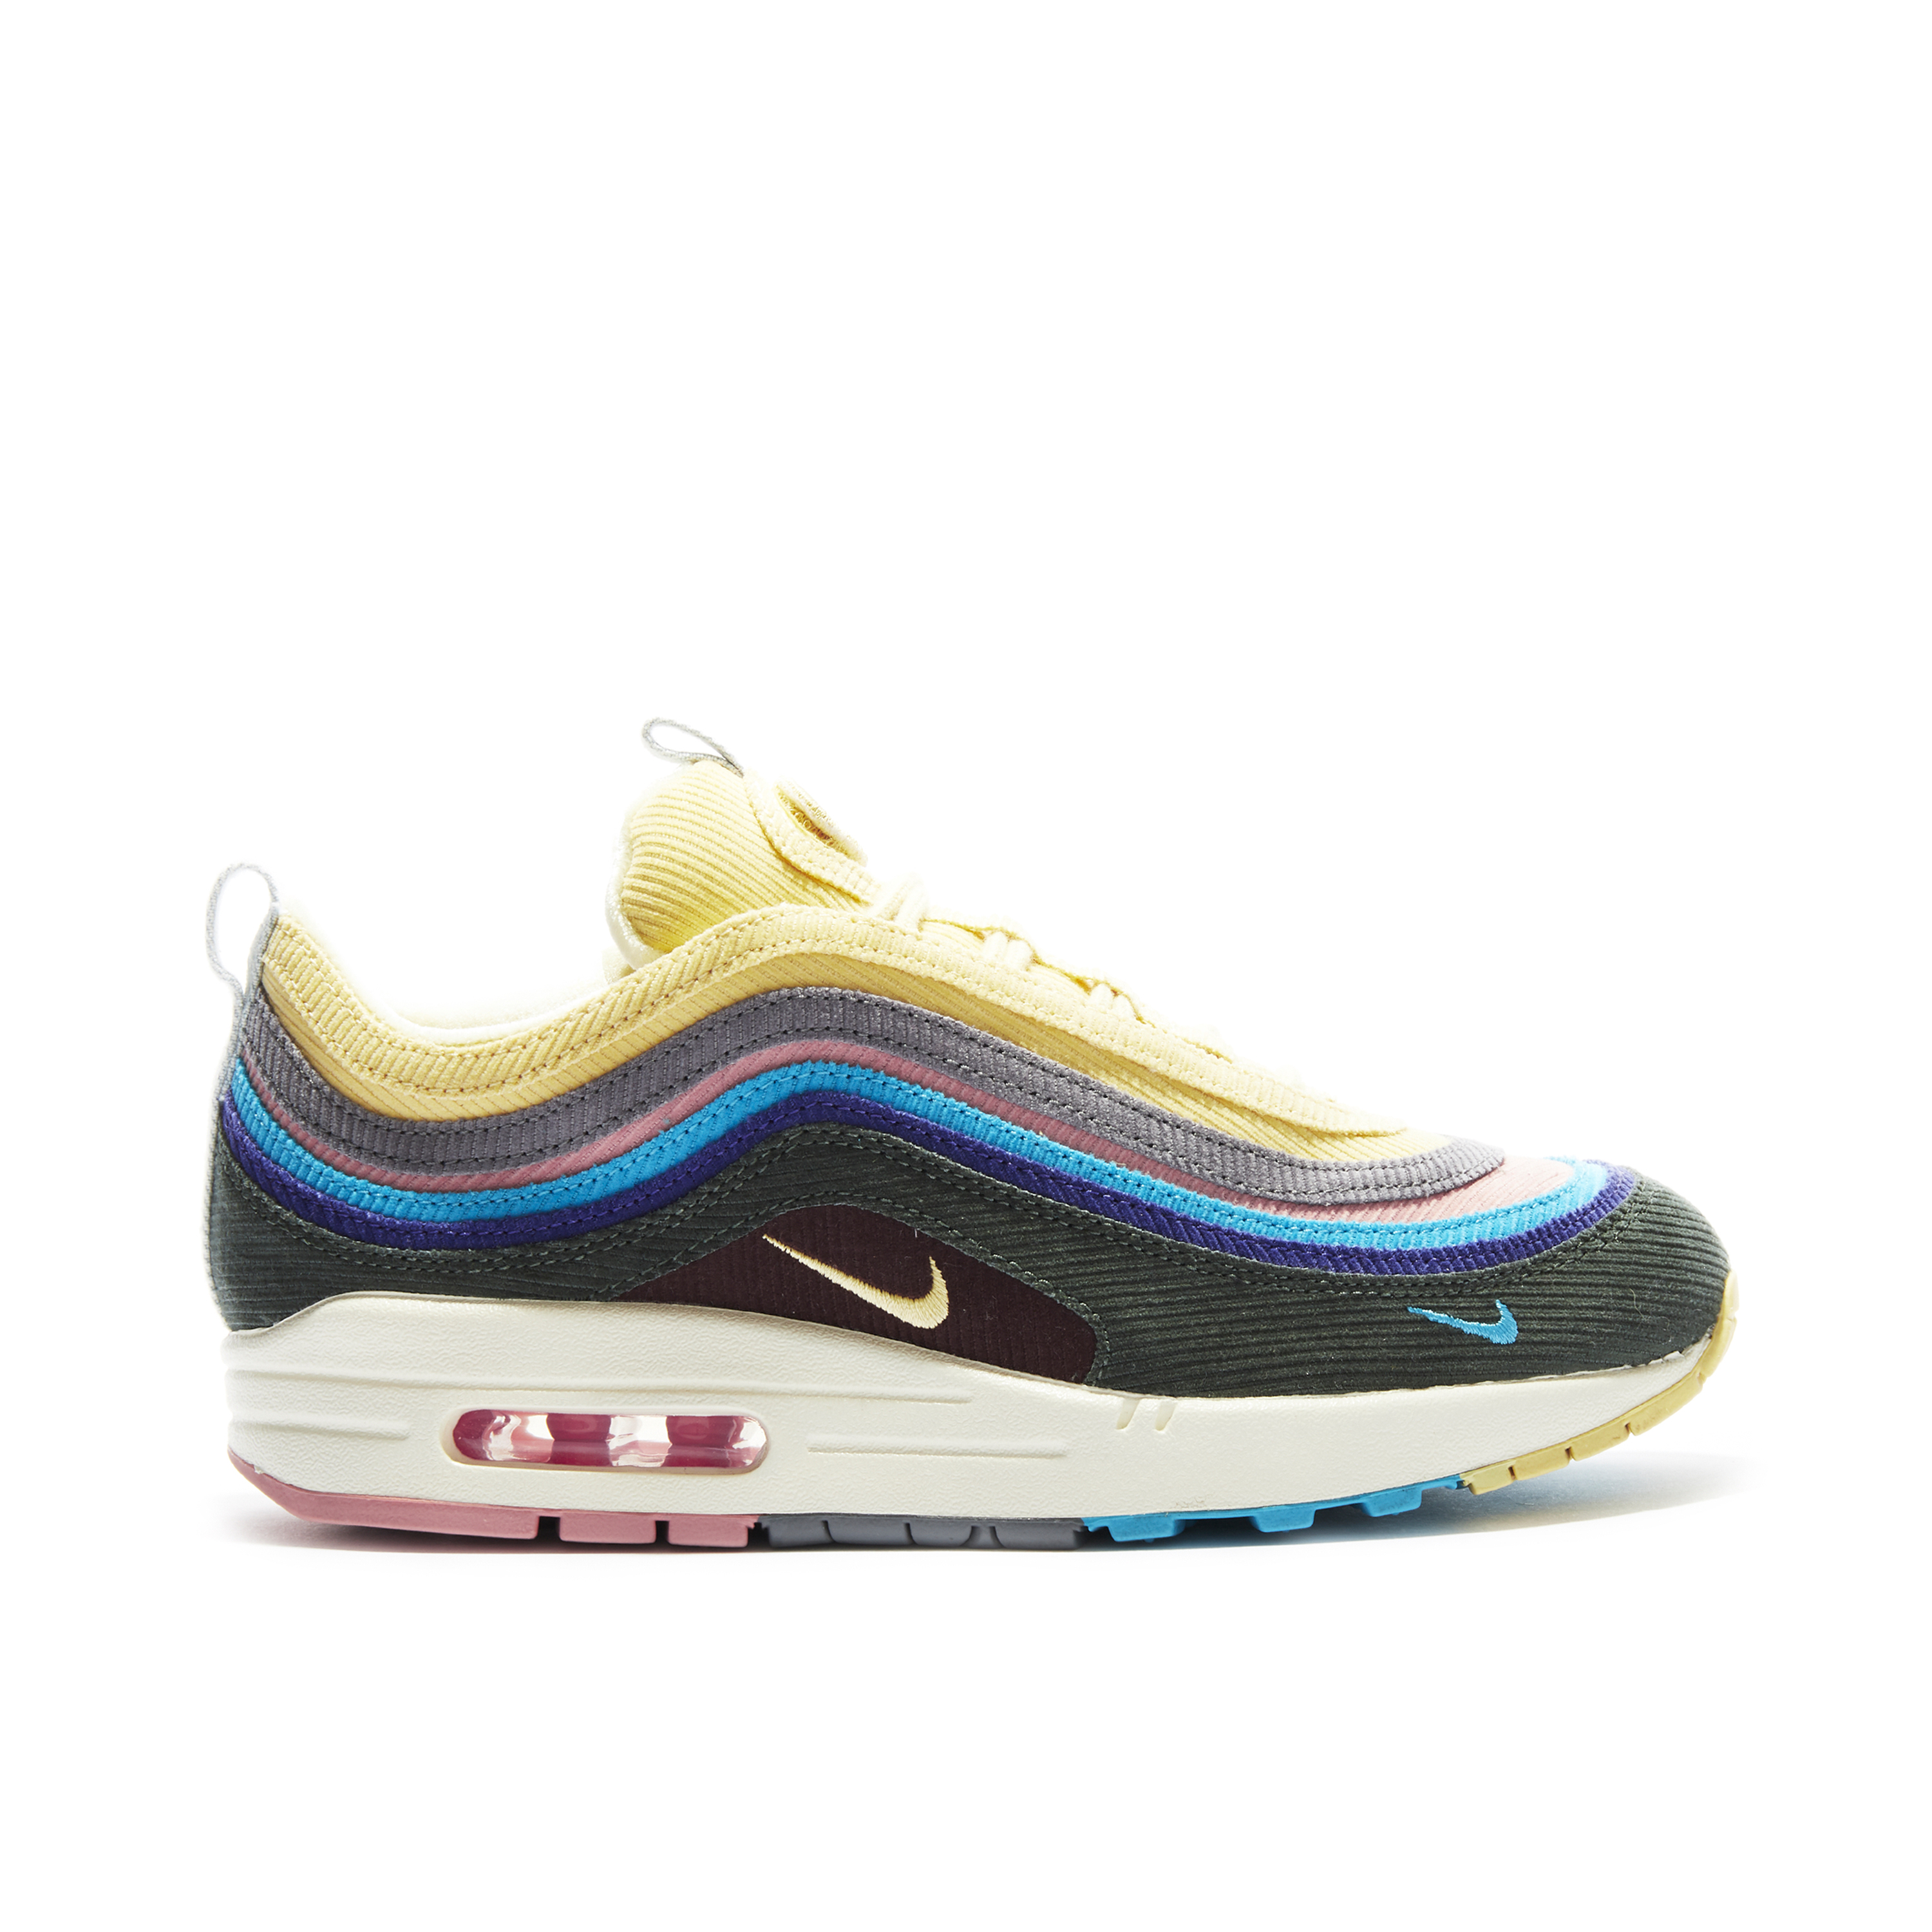 Air Max 1/97 x Sean Wotherspoon